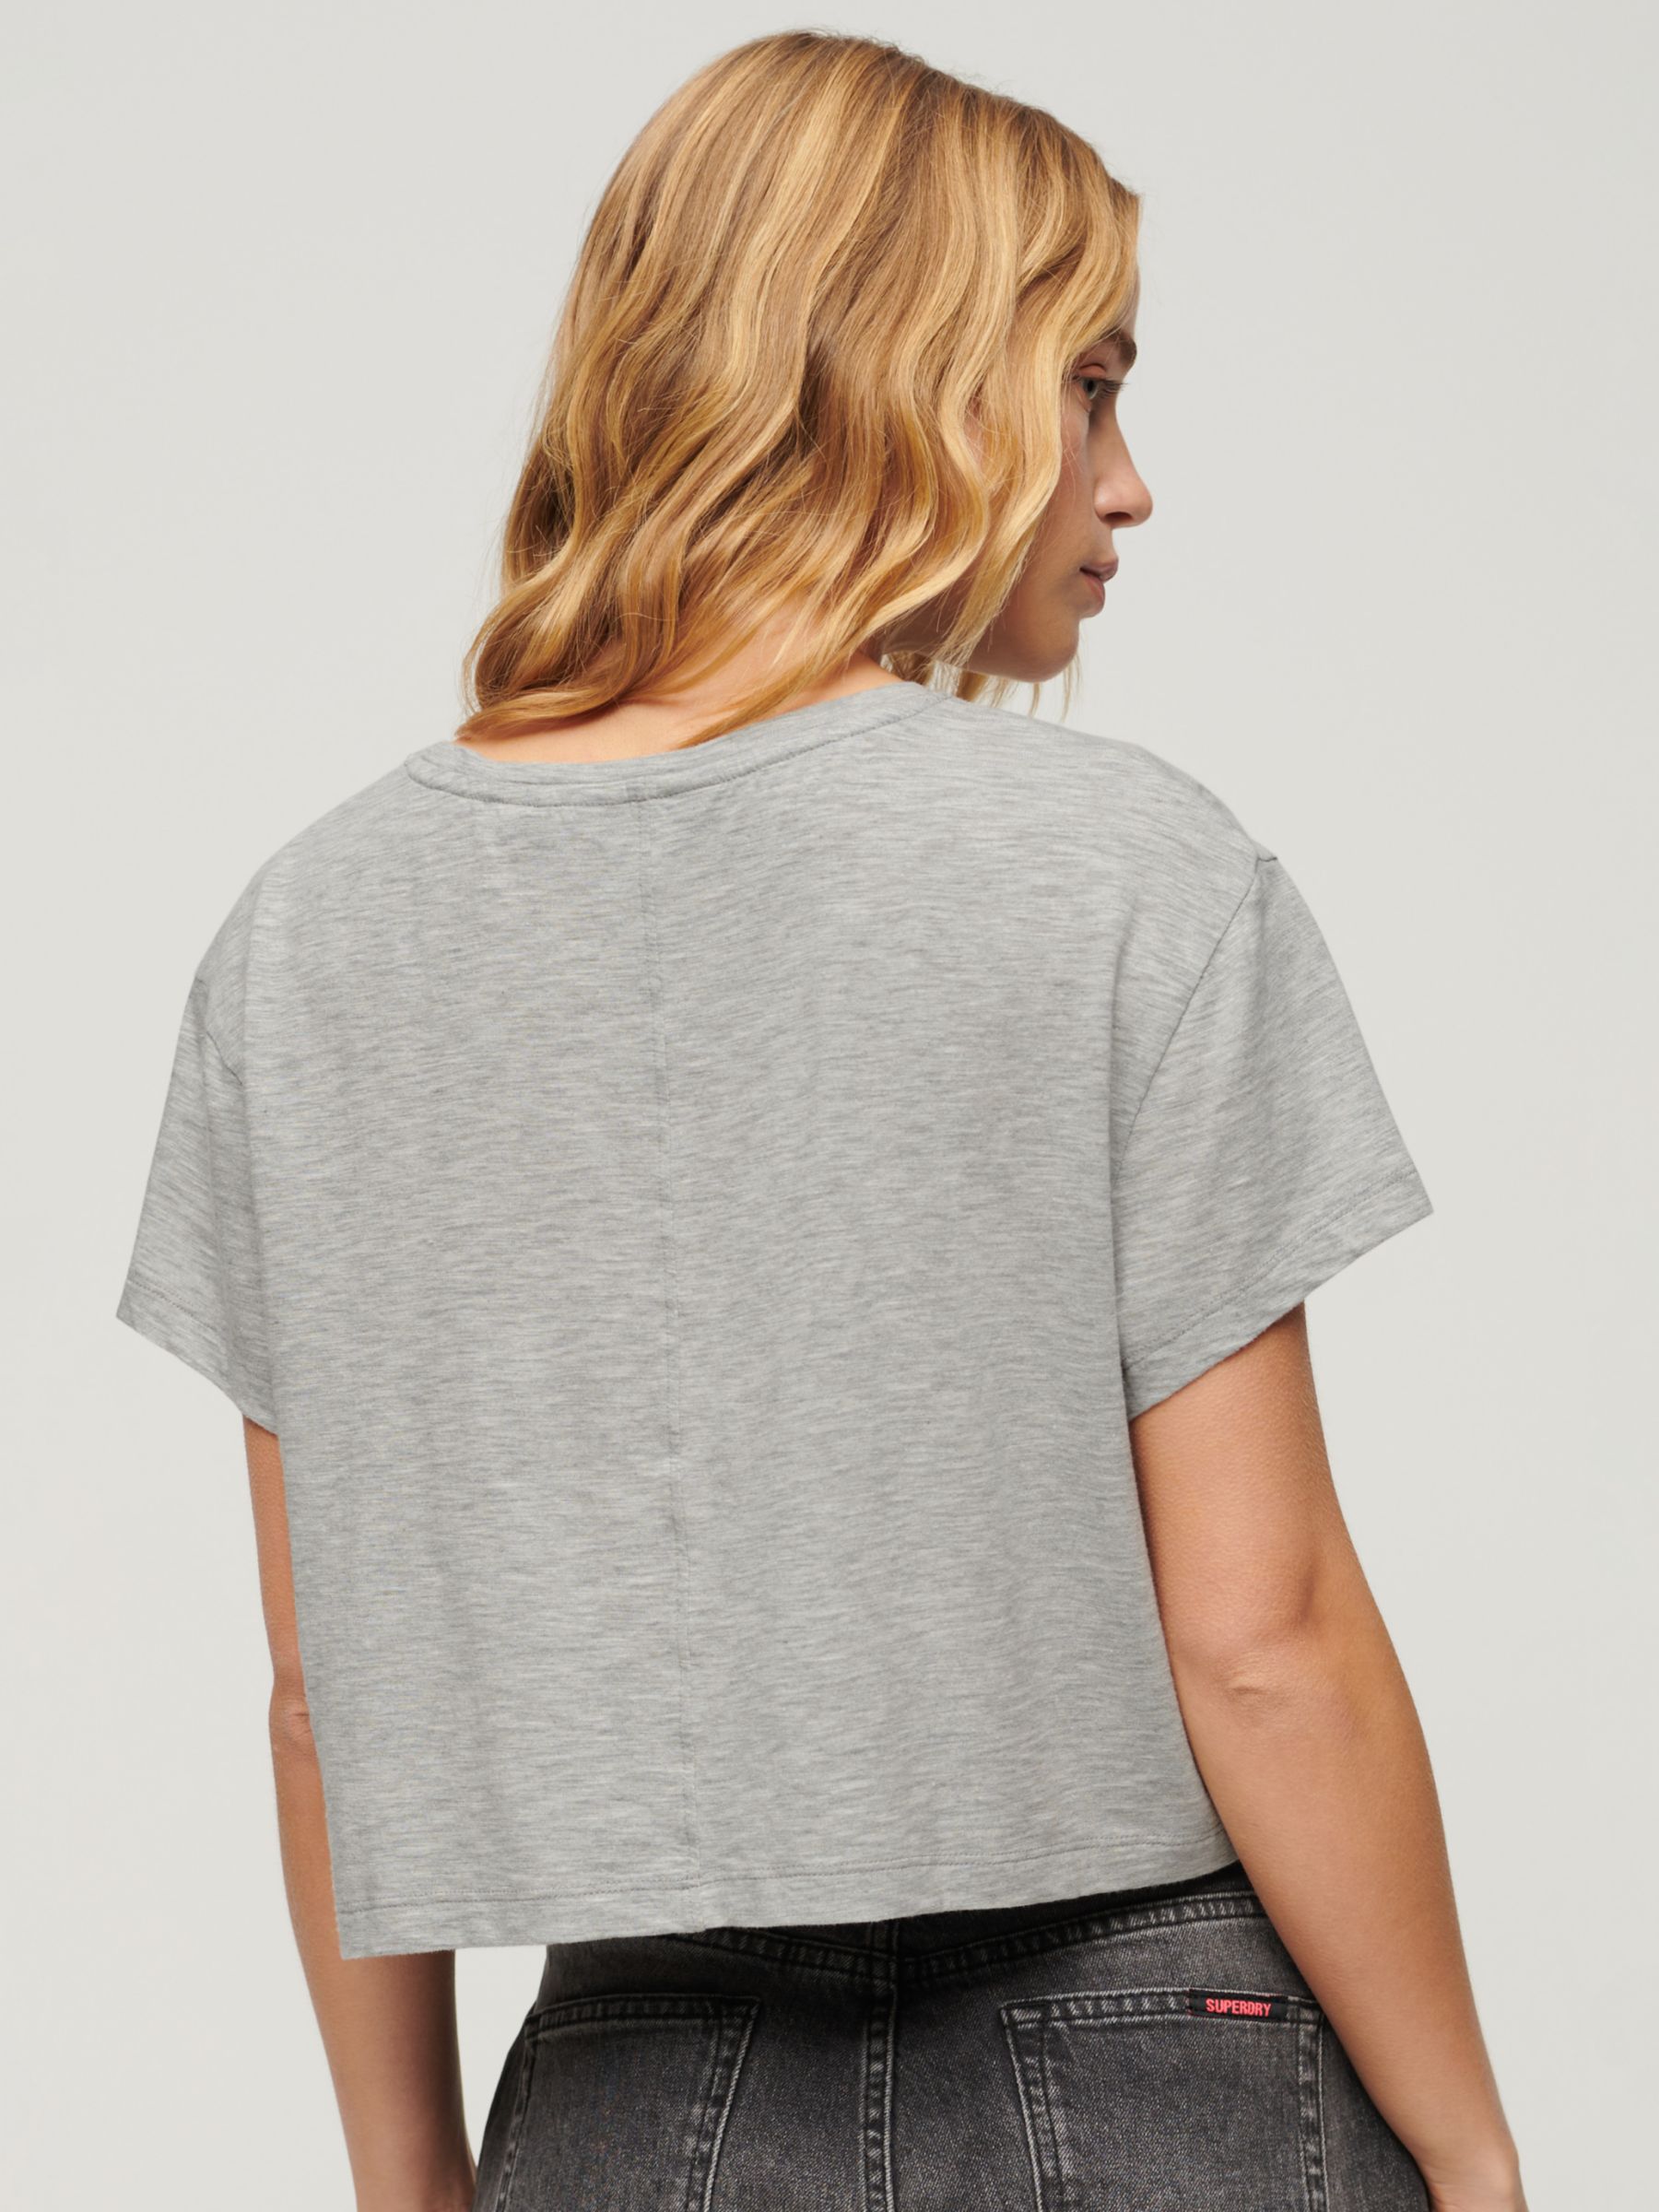 Buy Superdry Slouchy Cropped T-Shirt, Pepper Grey Marl Online at johnlewis.com